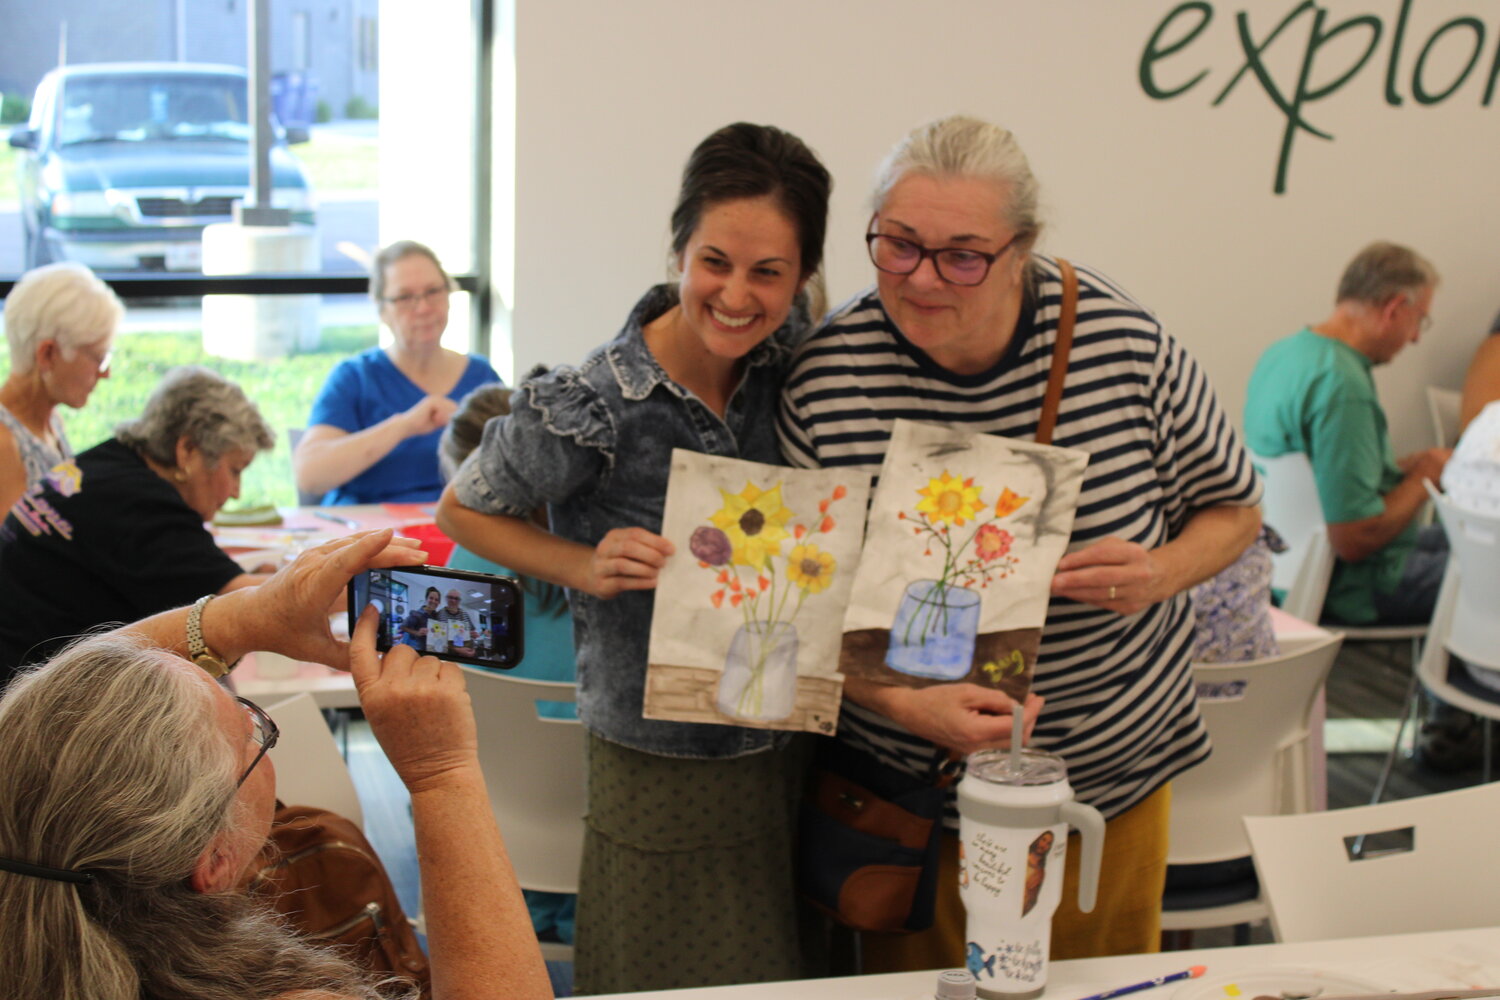 Shannon Gardner and Brigitte Gardner pose with their completed watercolor designs while Nancy Amburgey takes their picture at the end of the watercolor event.